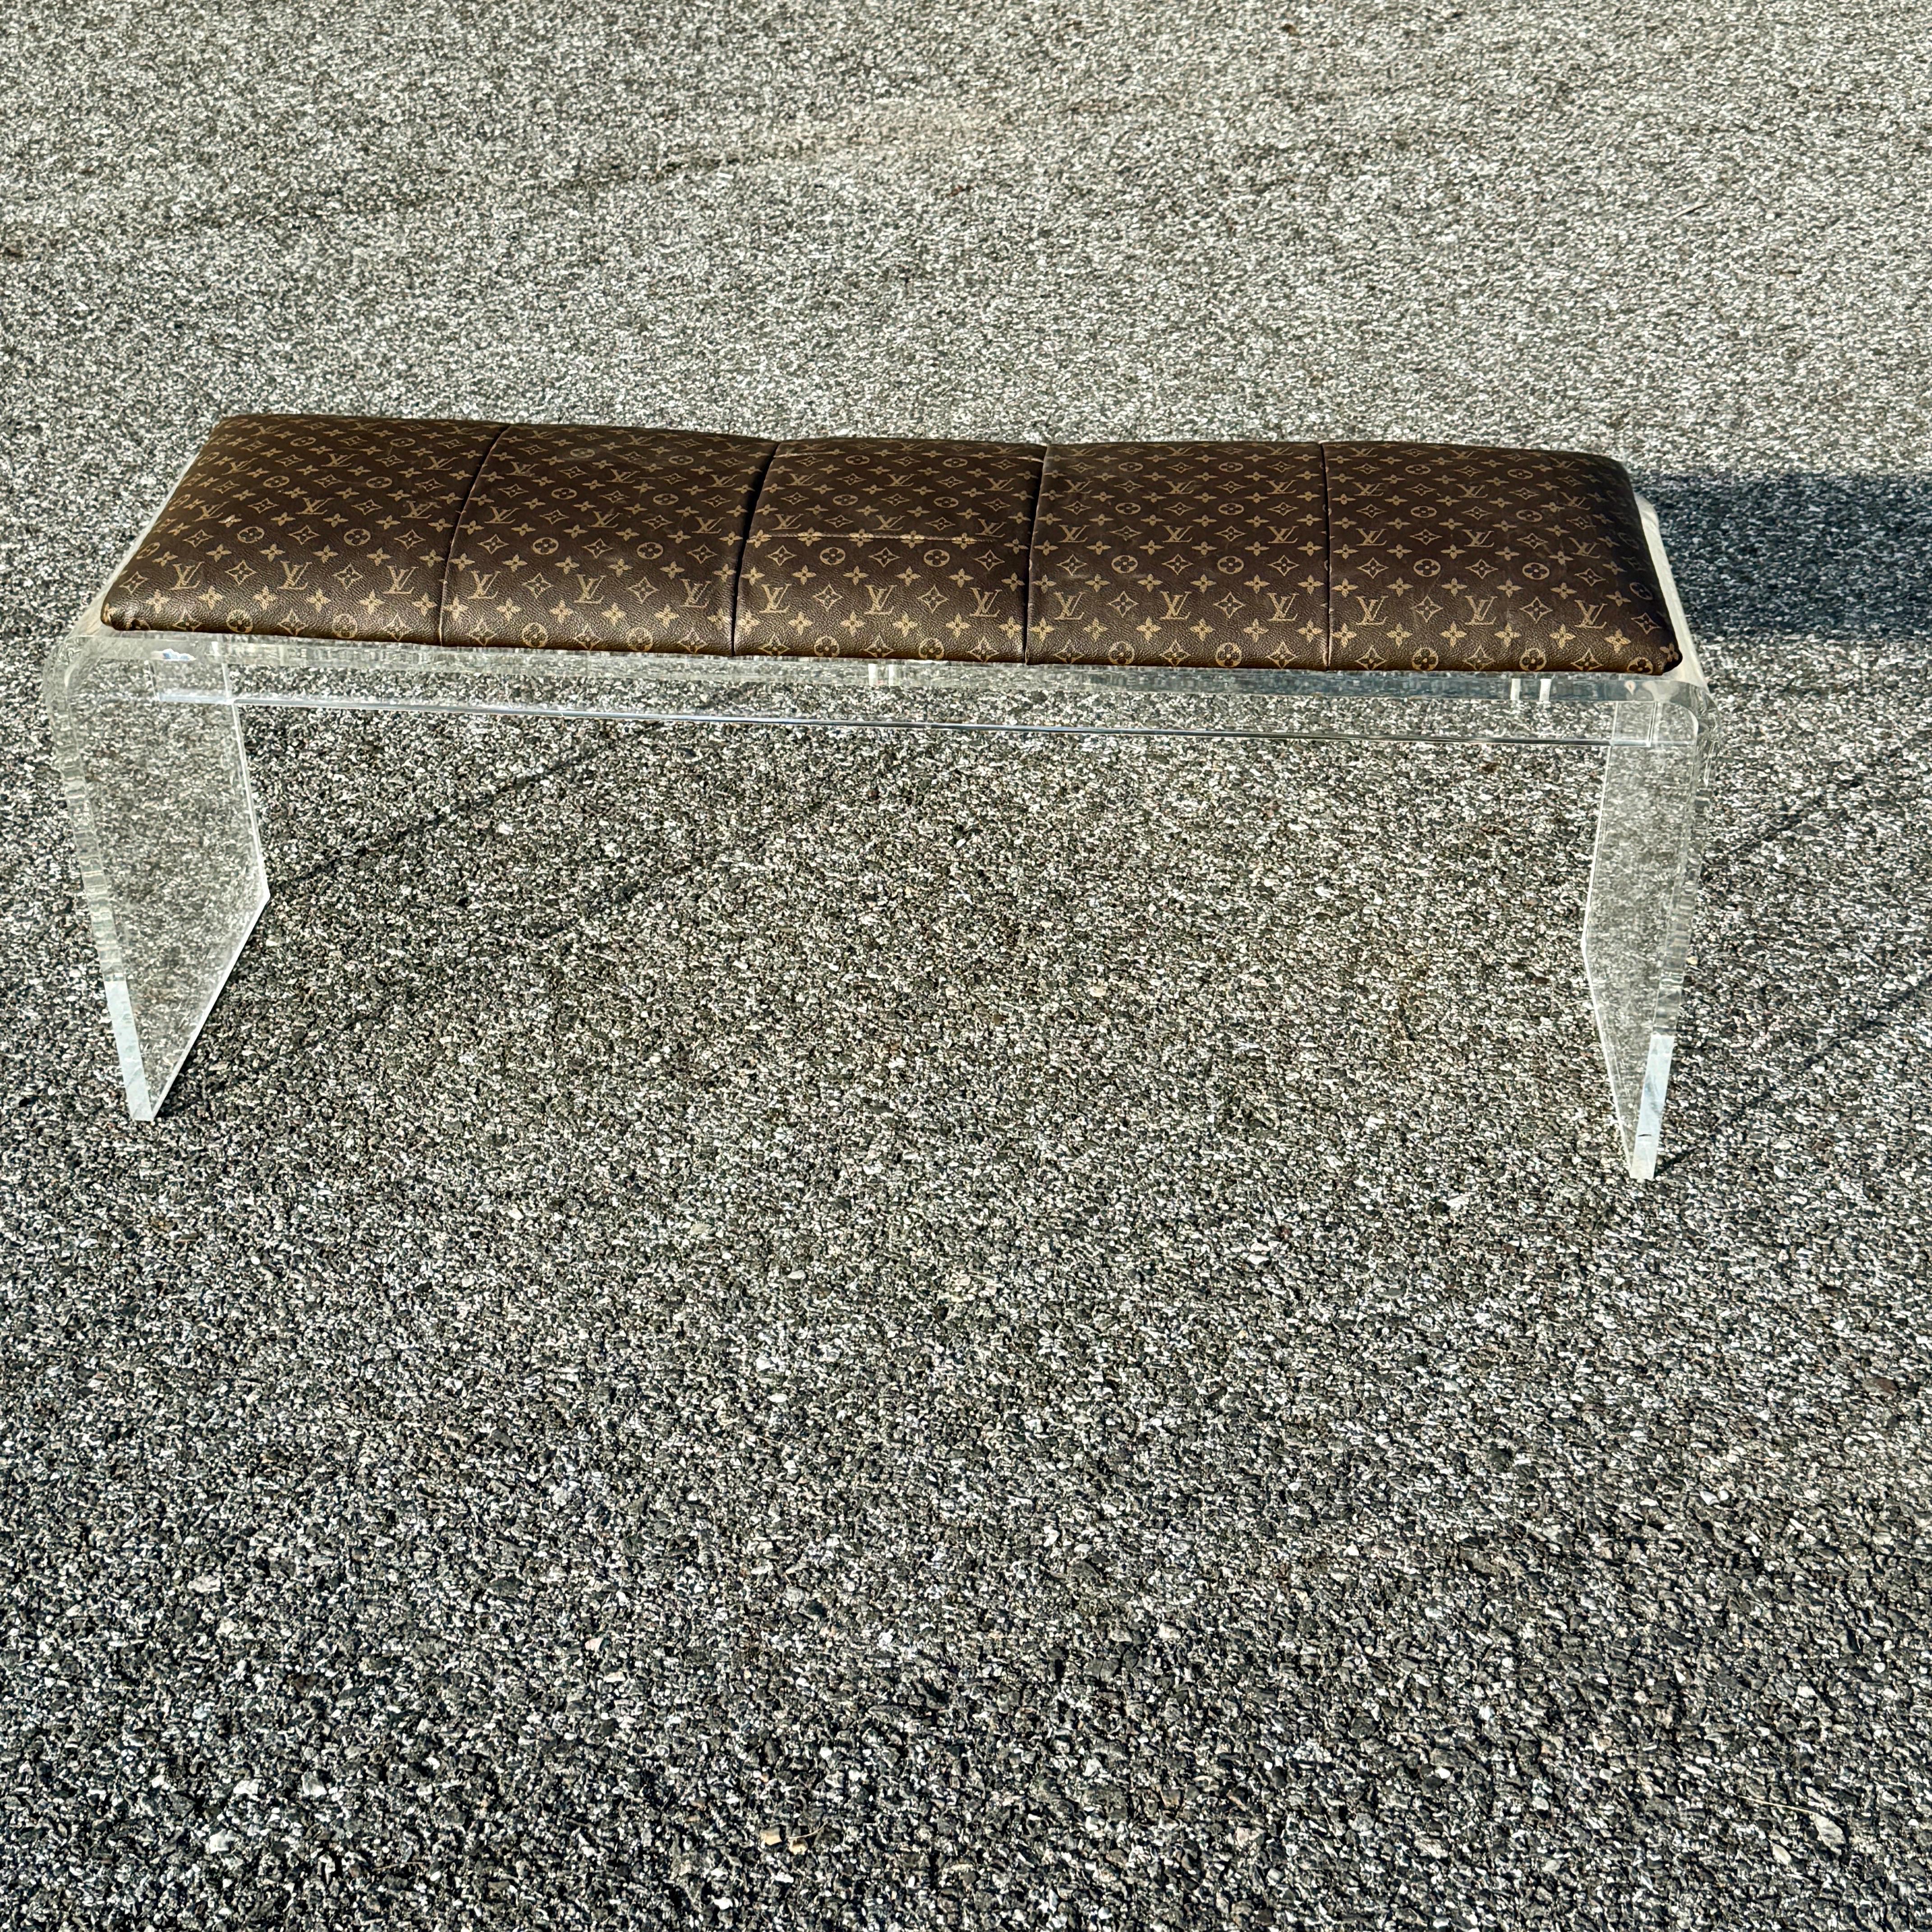 Lucite Bench Upholstered in Louis Vuitton Monogram Fabric  For Sale 6